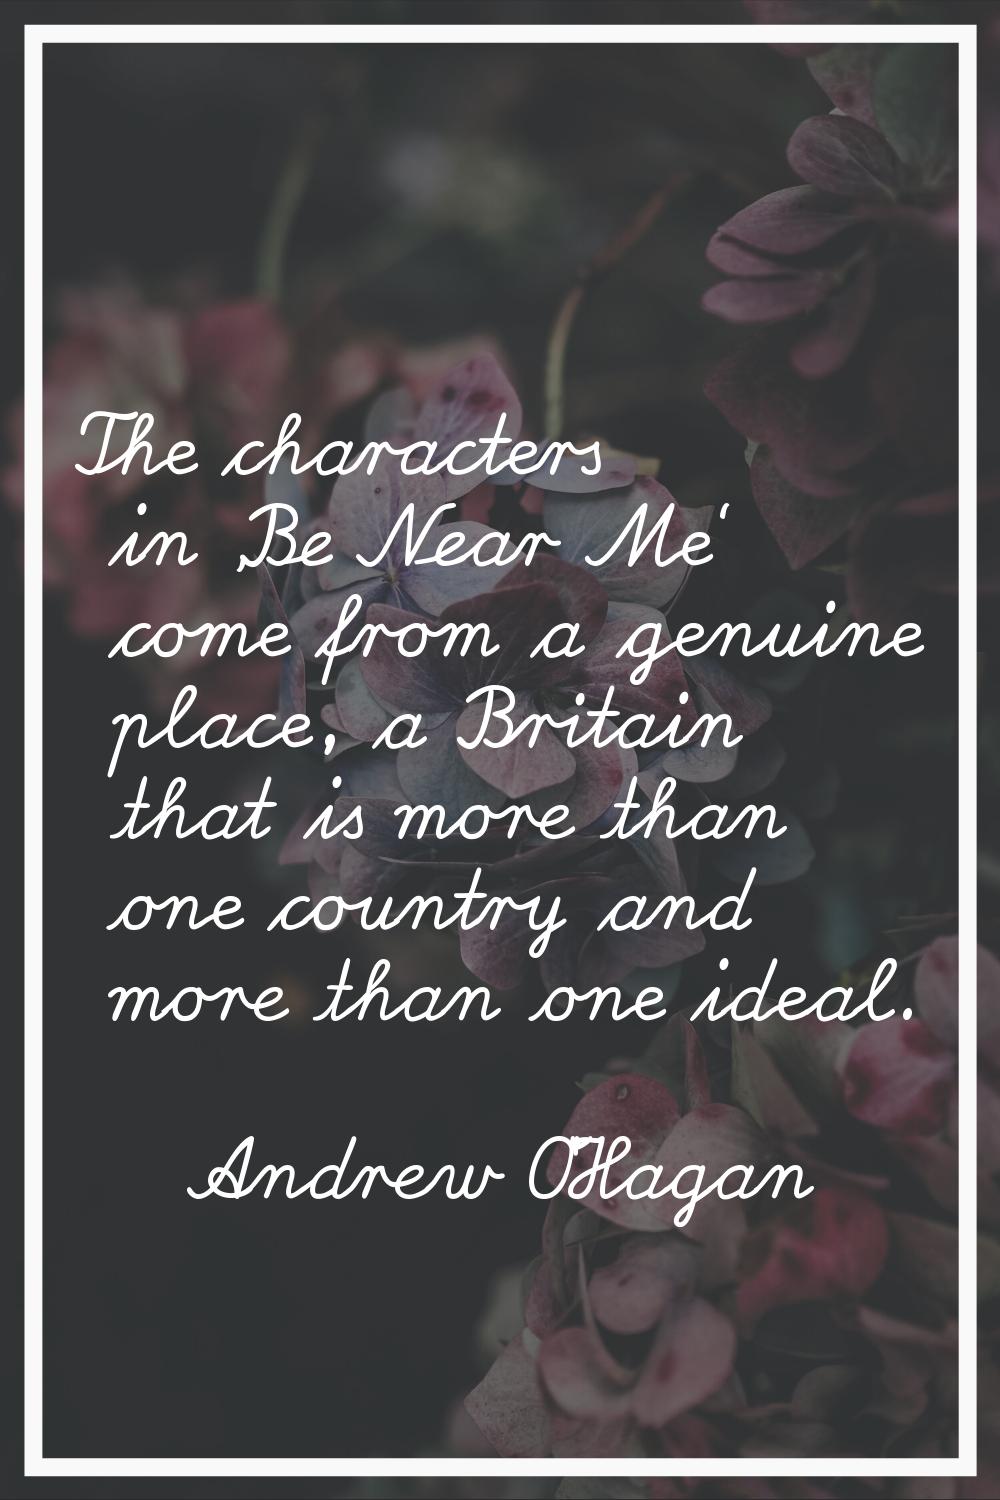 The characters in 'Be Near Me' come from a genuine place, a Britain that is more than one country a